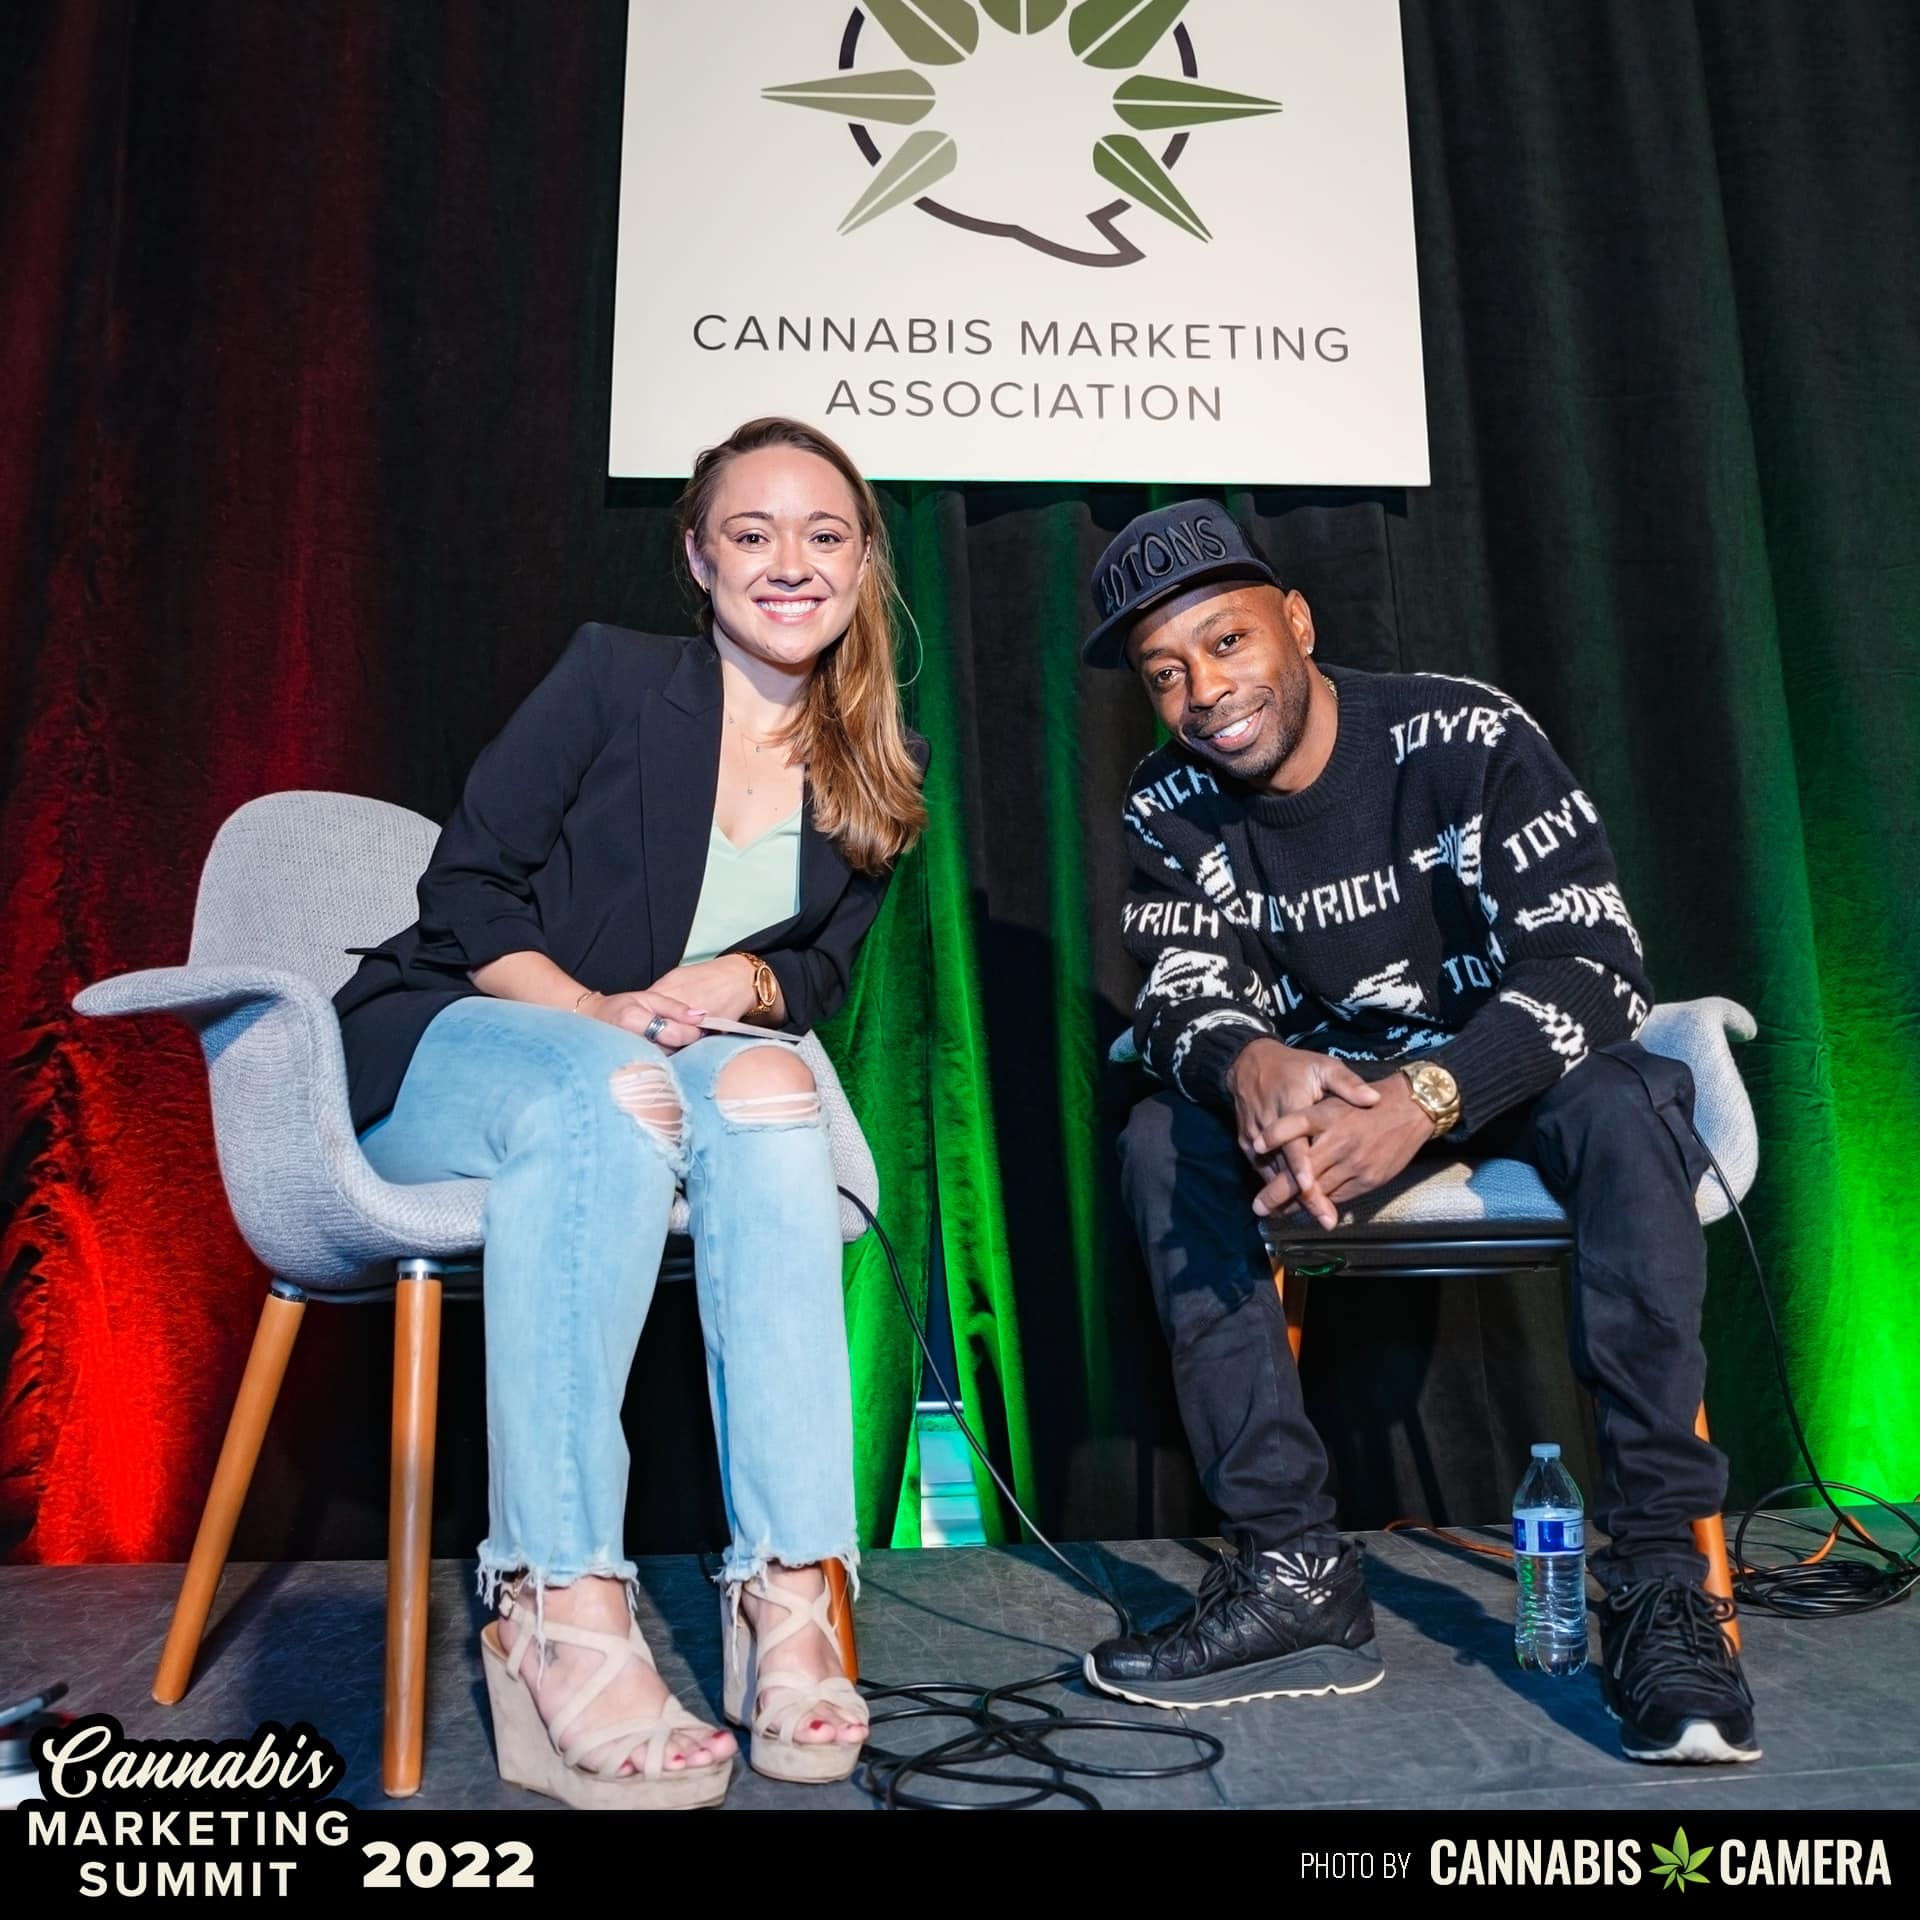 lisa and corvain on stage at the cannabis marketing summit